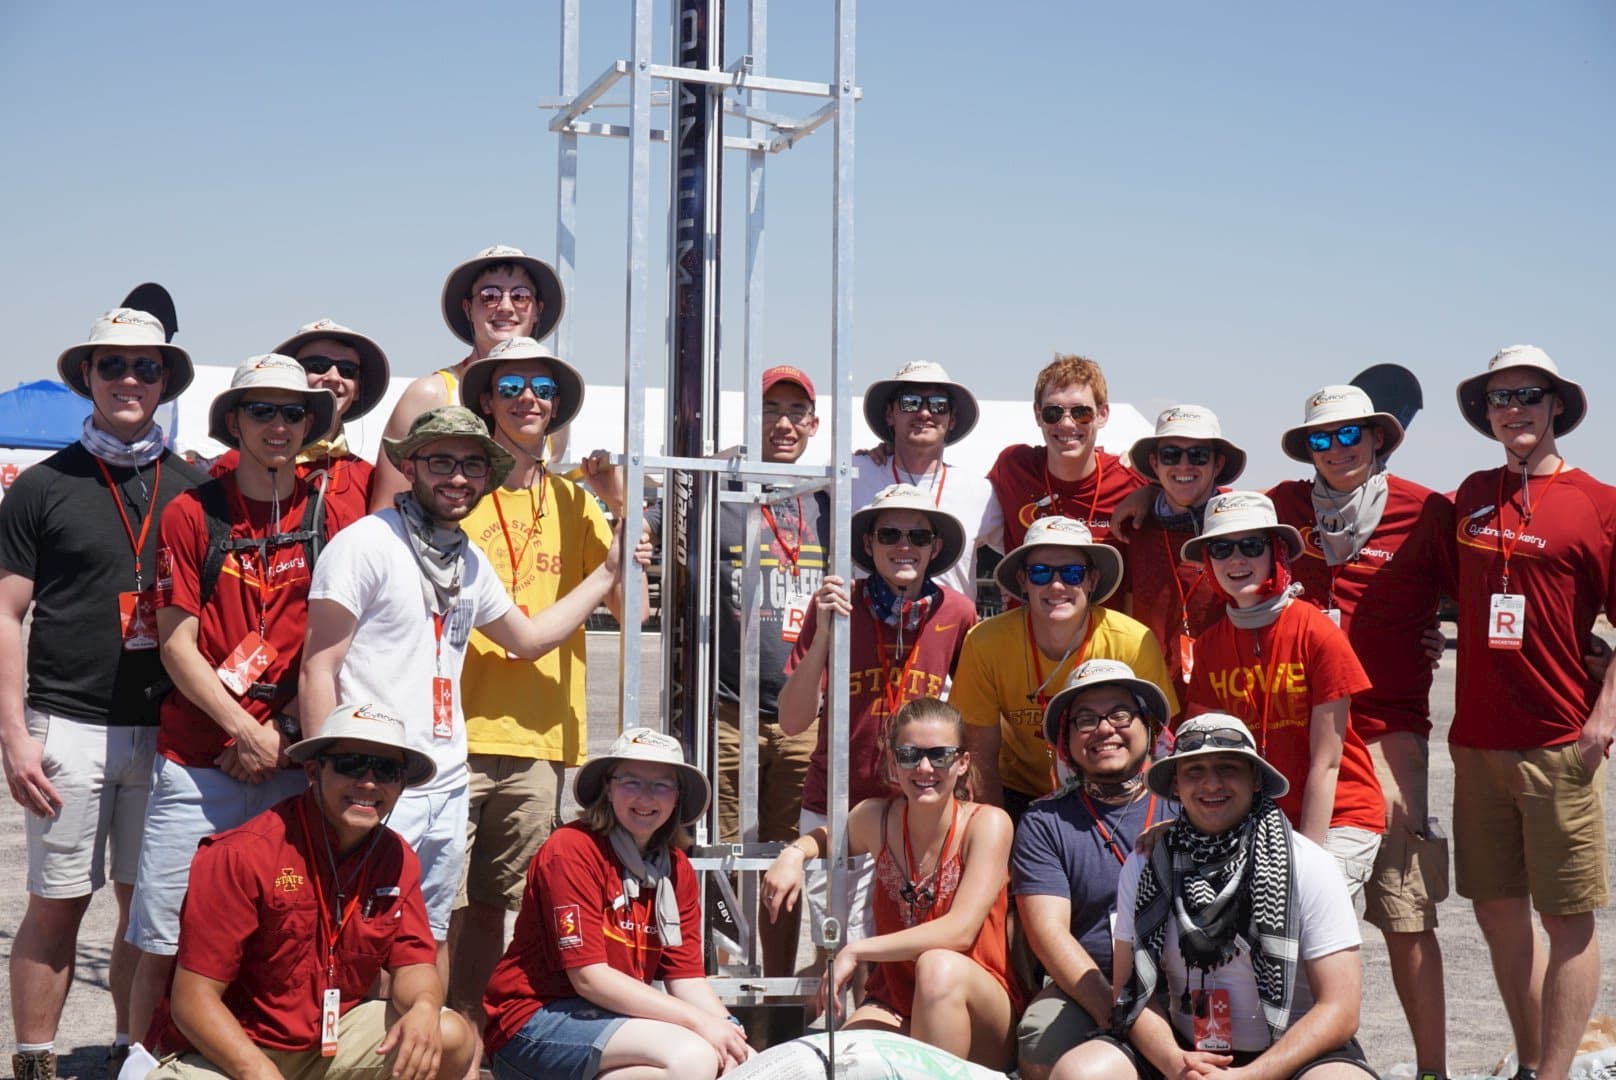 SA Cup 2019 Spotlight: Iowa State reinvents their rocket... and their team